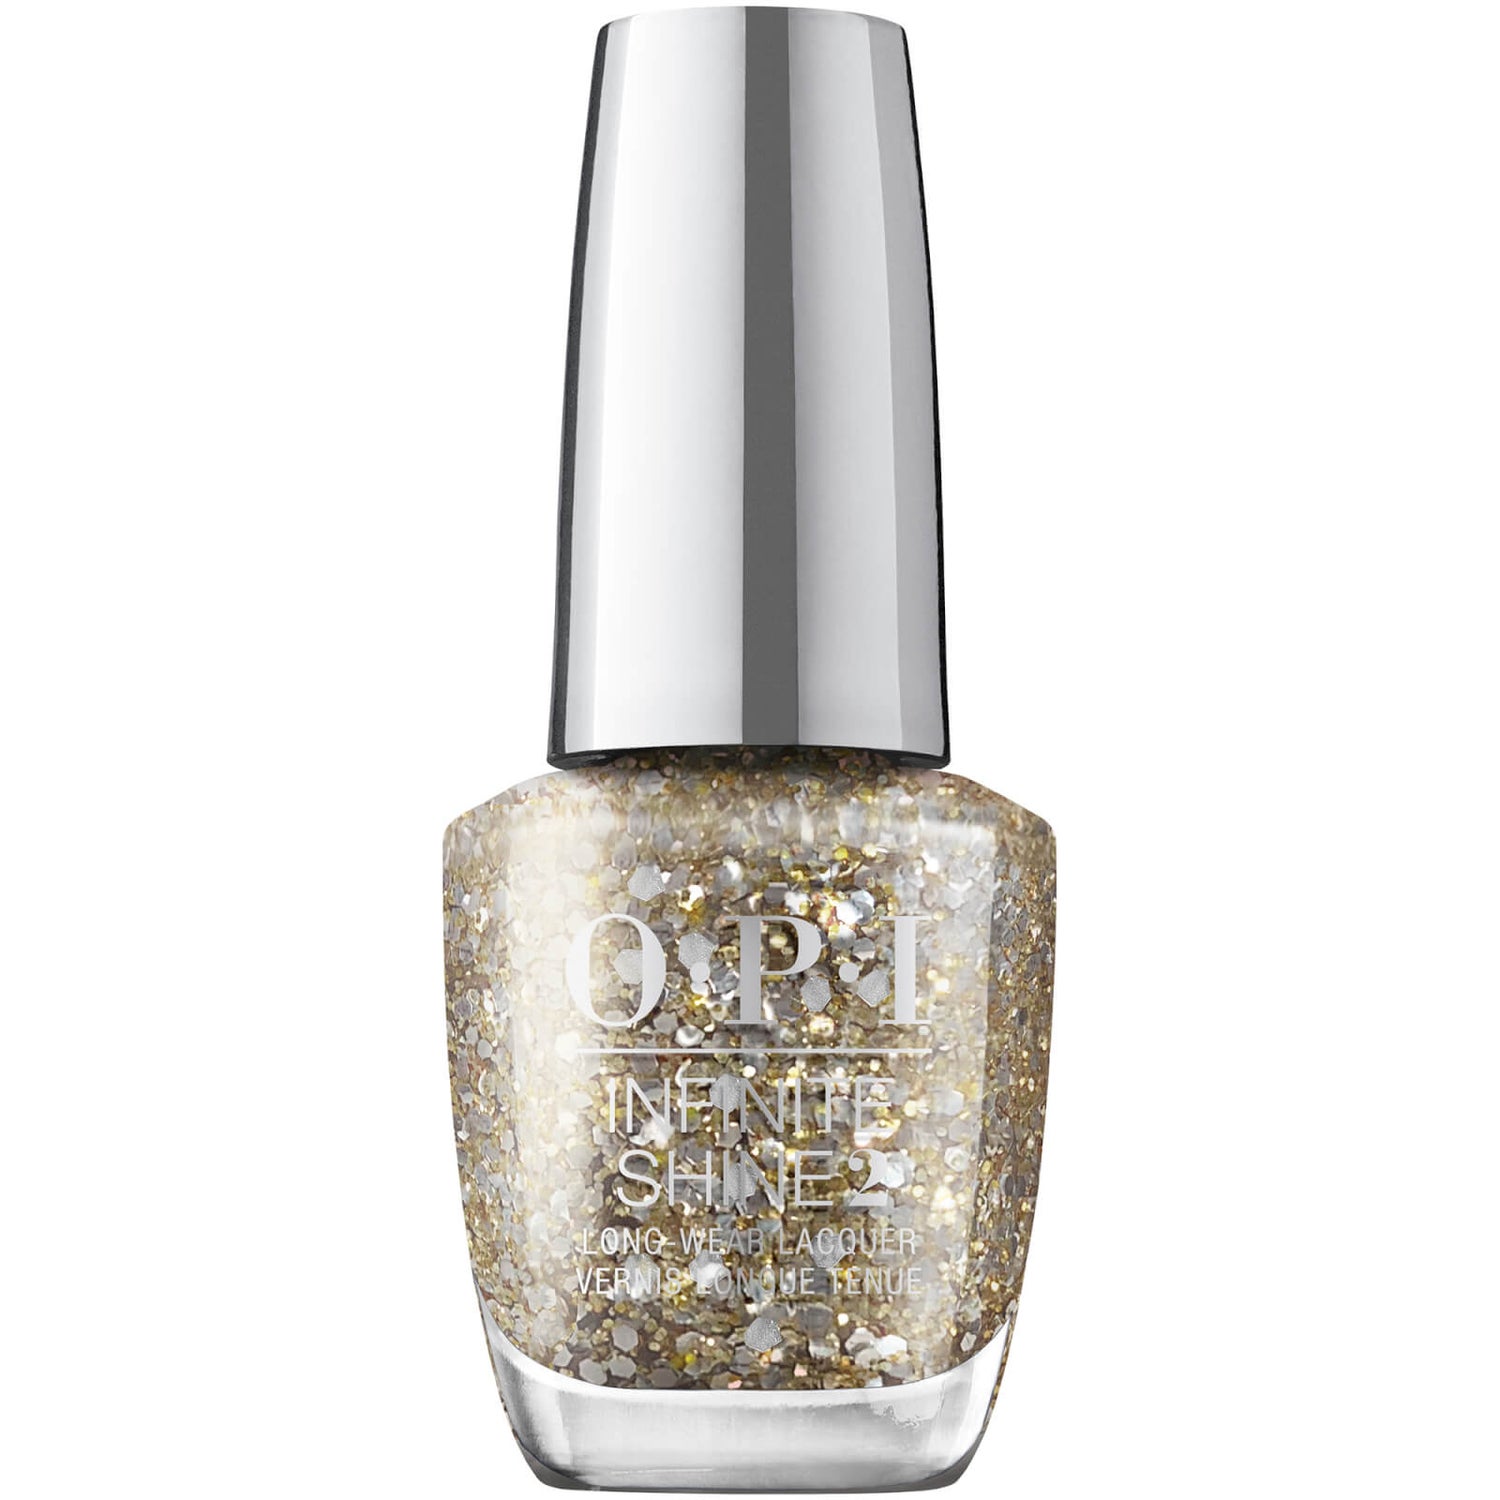 OPI Jewel Be Bold Collection Infinite Shine Nail Polish - Pop the Baubles